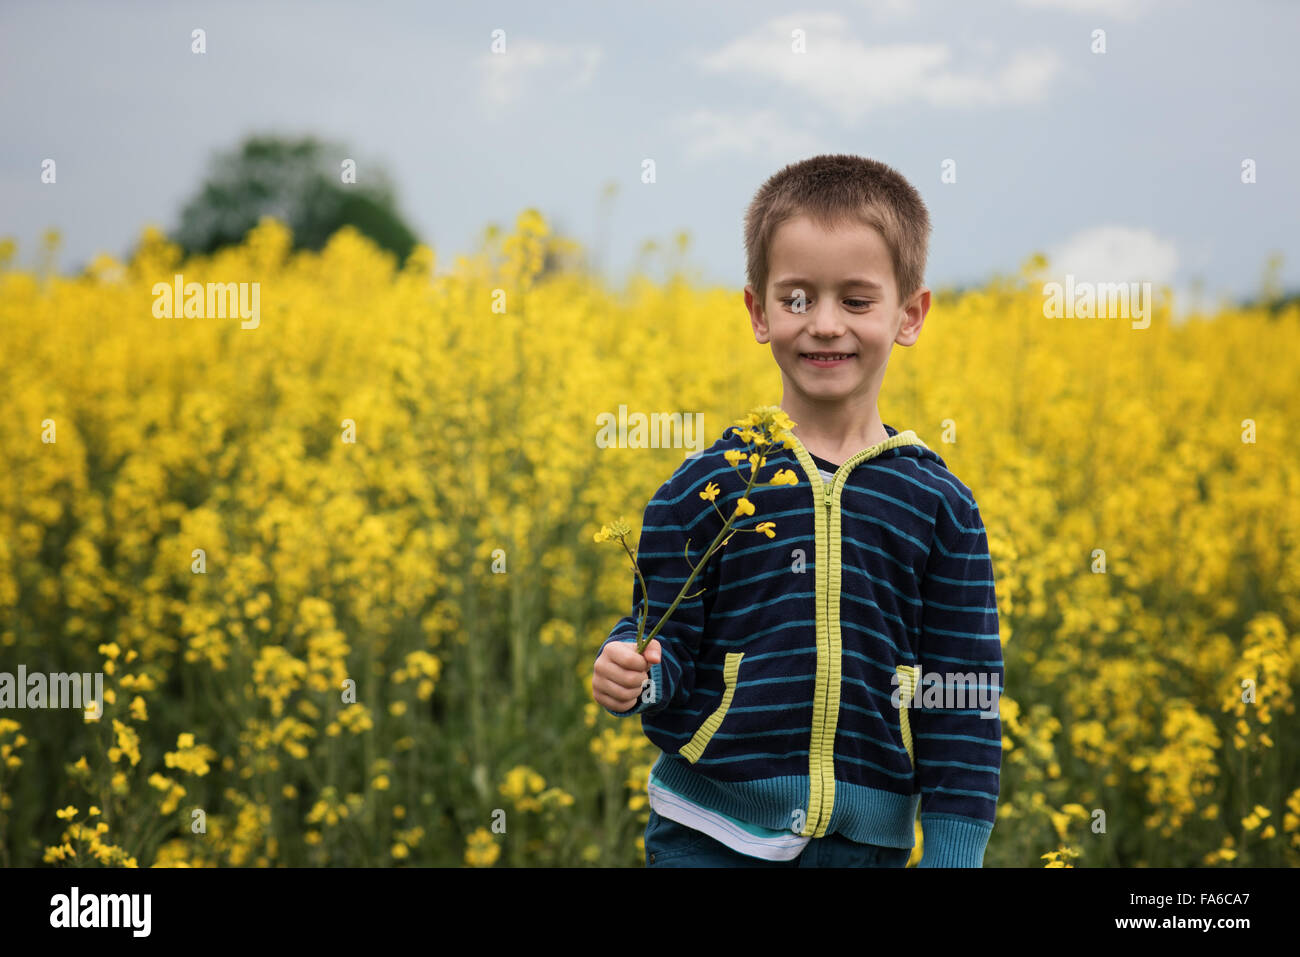 Smiling boy holding yellow flower in rapeseed field Banque D'Images